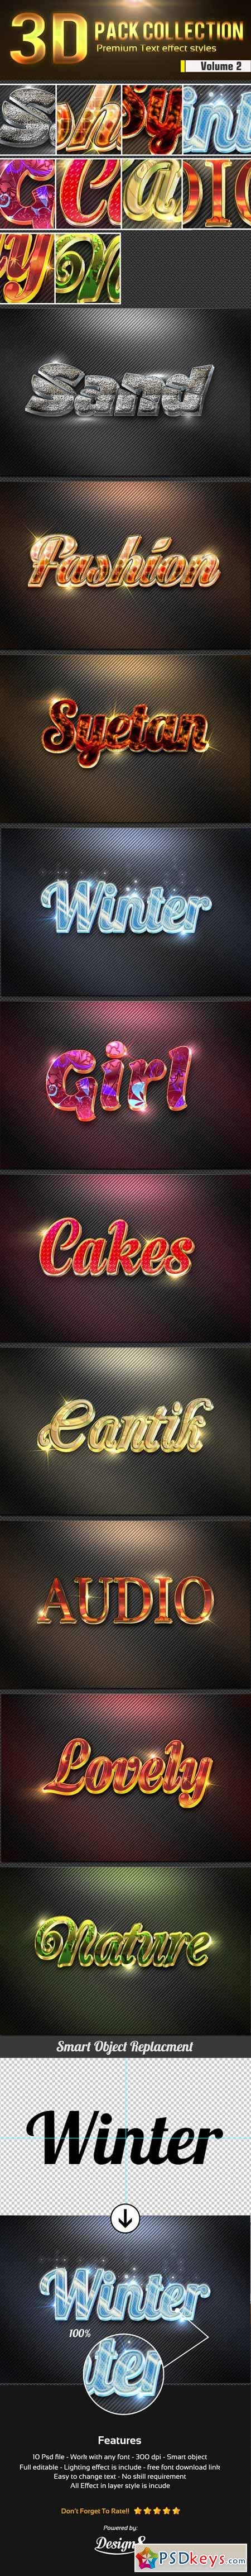 New 3D Photoshop Text Effect Style Vol 2 11896871